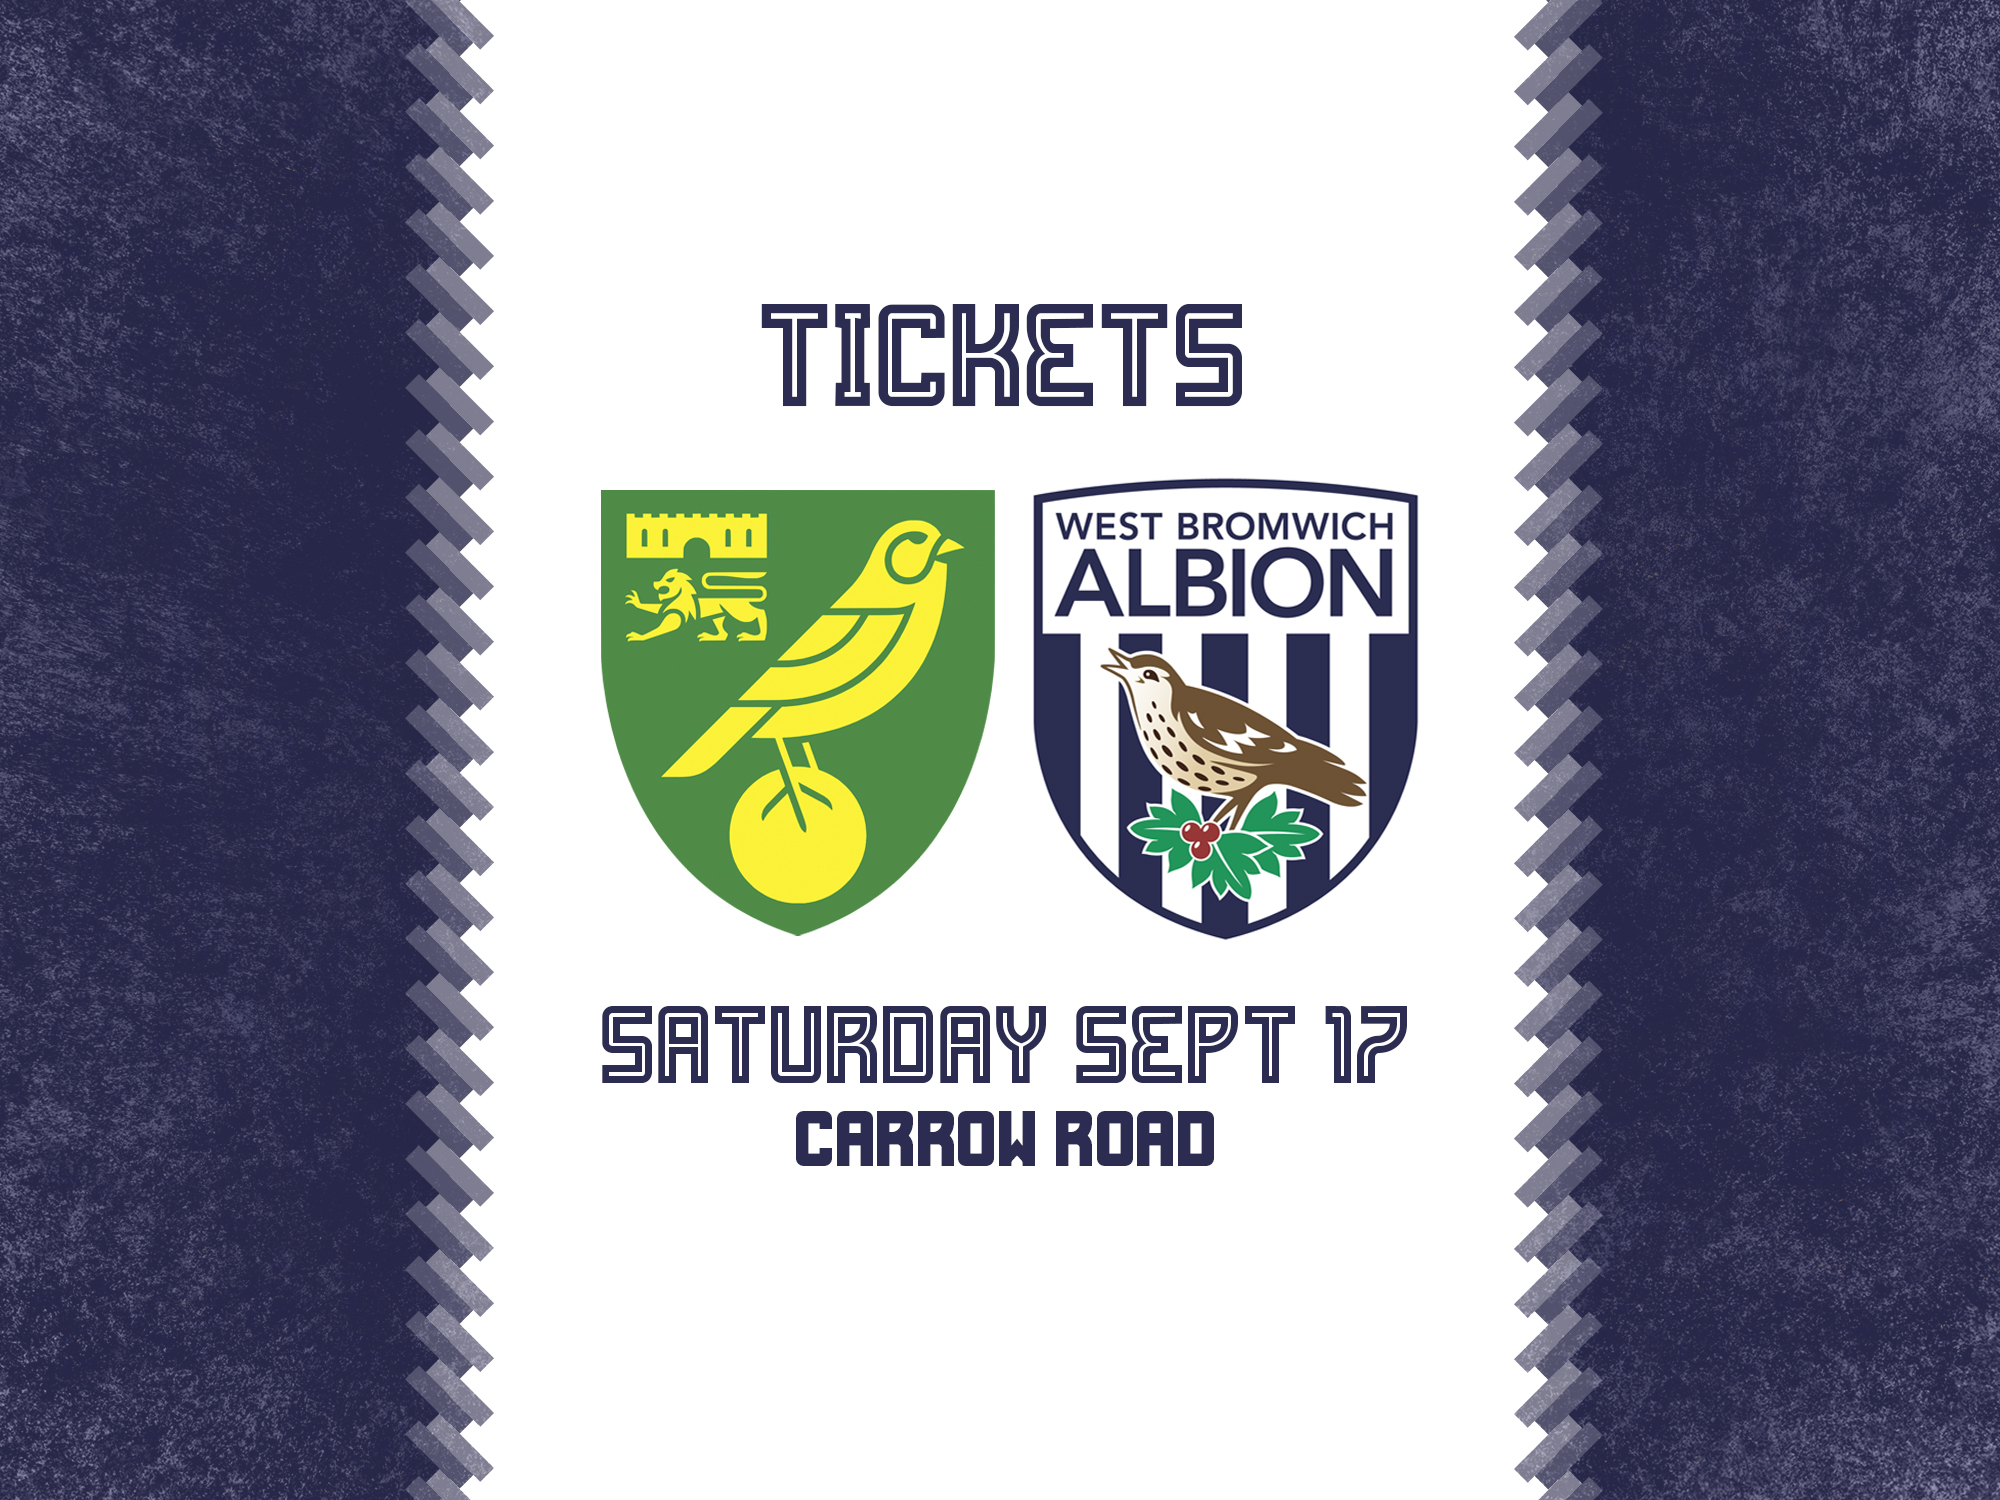 Tickets are now on sale for Albion's trip to Norwich